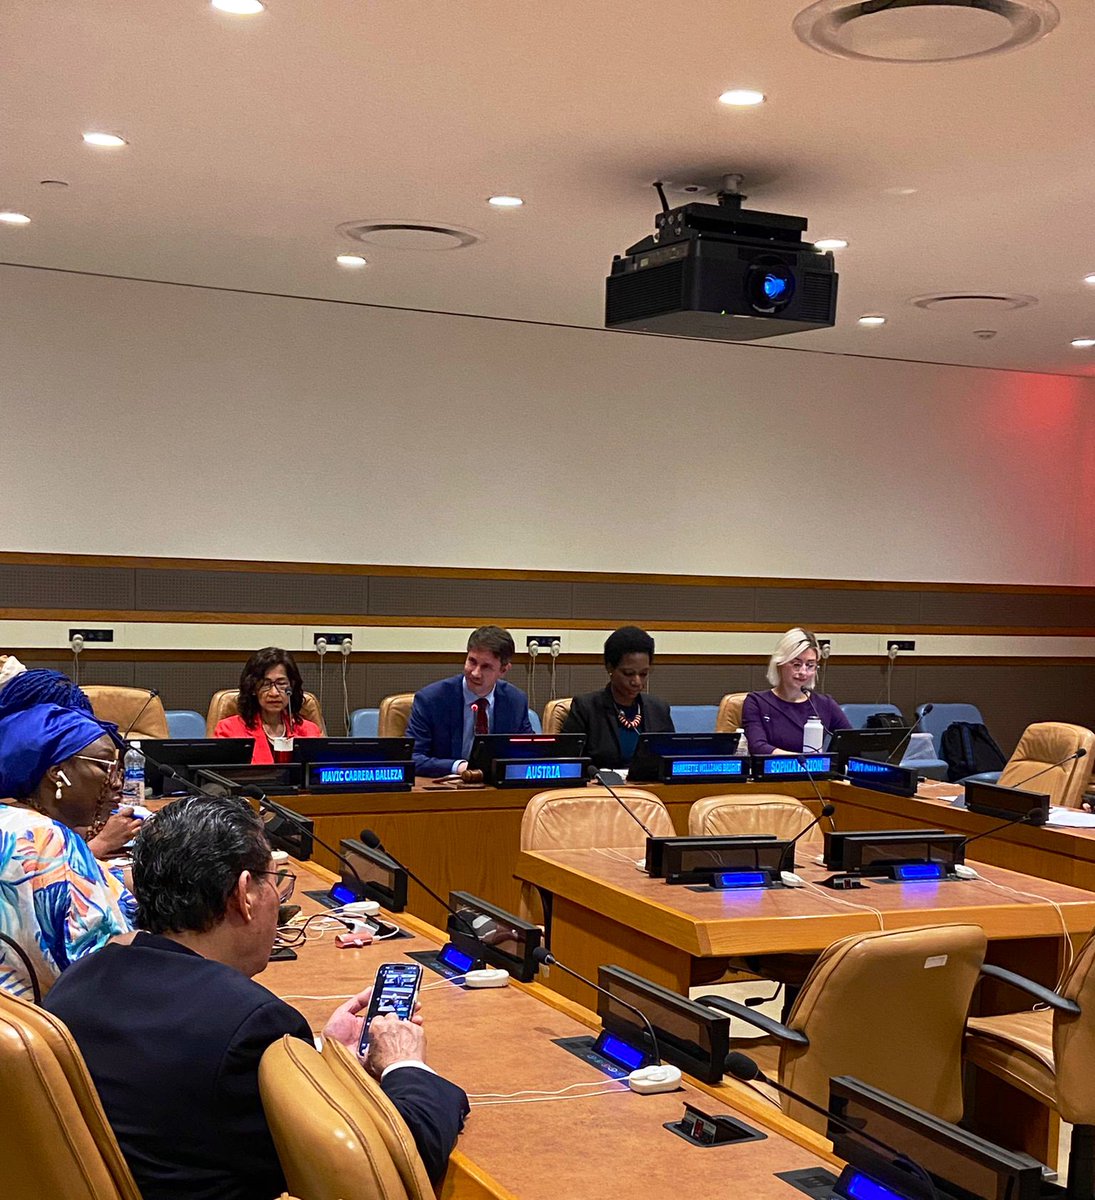 🇦🇹 calls for the full and meaningful involvement and leadership of women in humanitarian, development, and peace work.

This #triplenexus approach is 🔑 to effectively rebuilding crisis-affected societies, particularly at the community level! @GNWP #WPS #empowerwomen